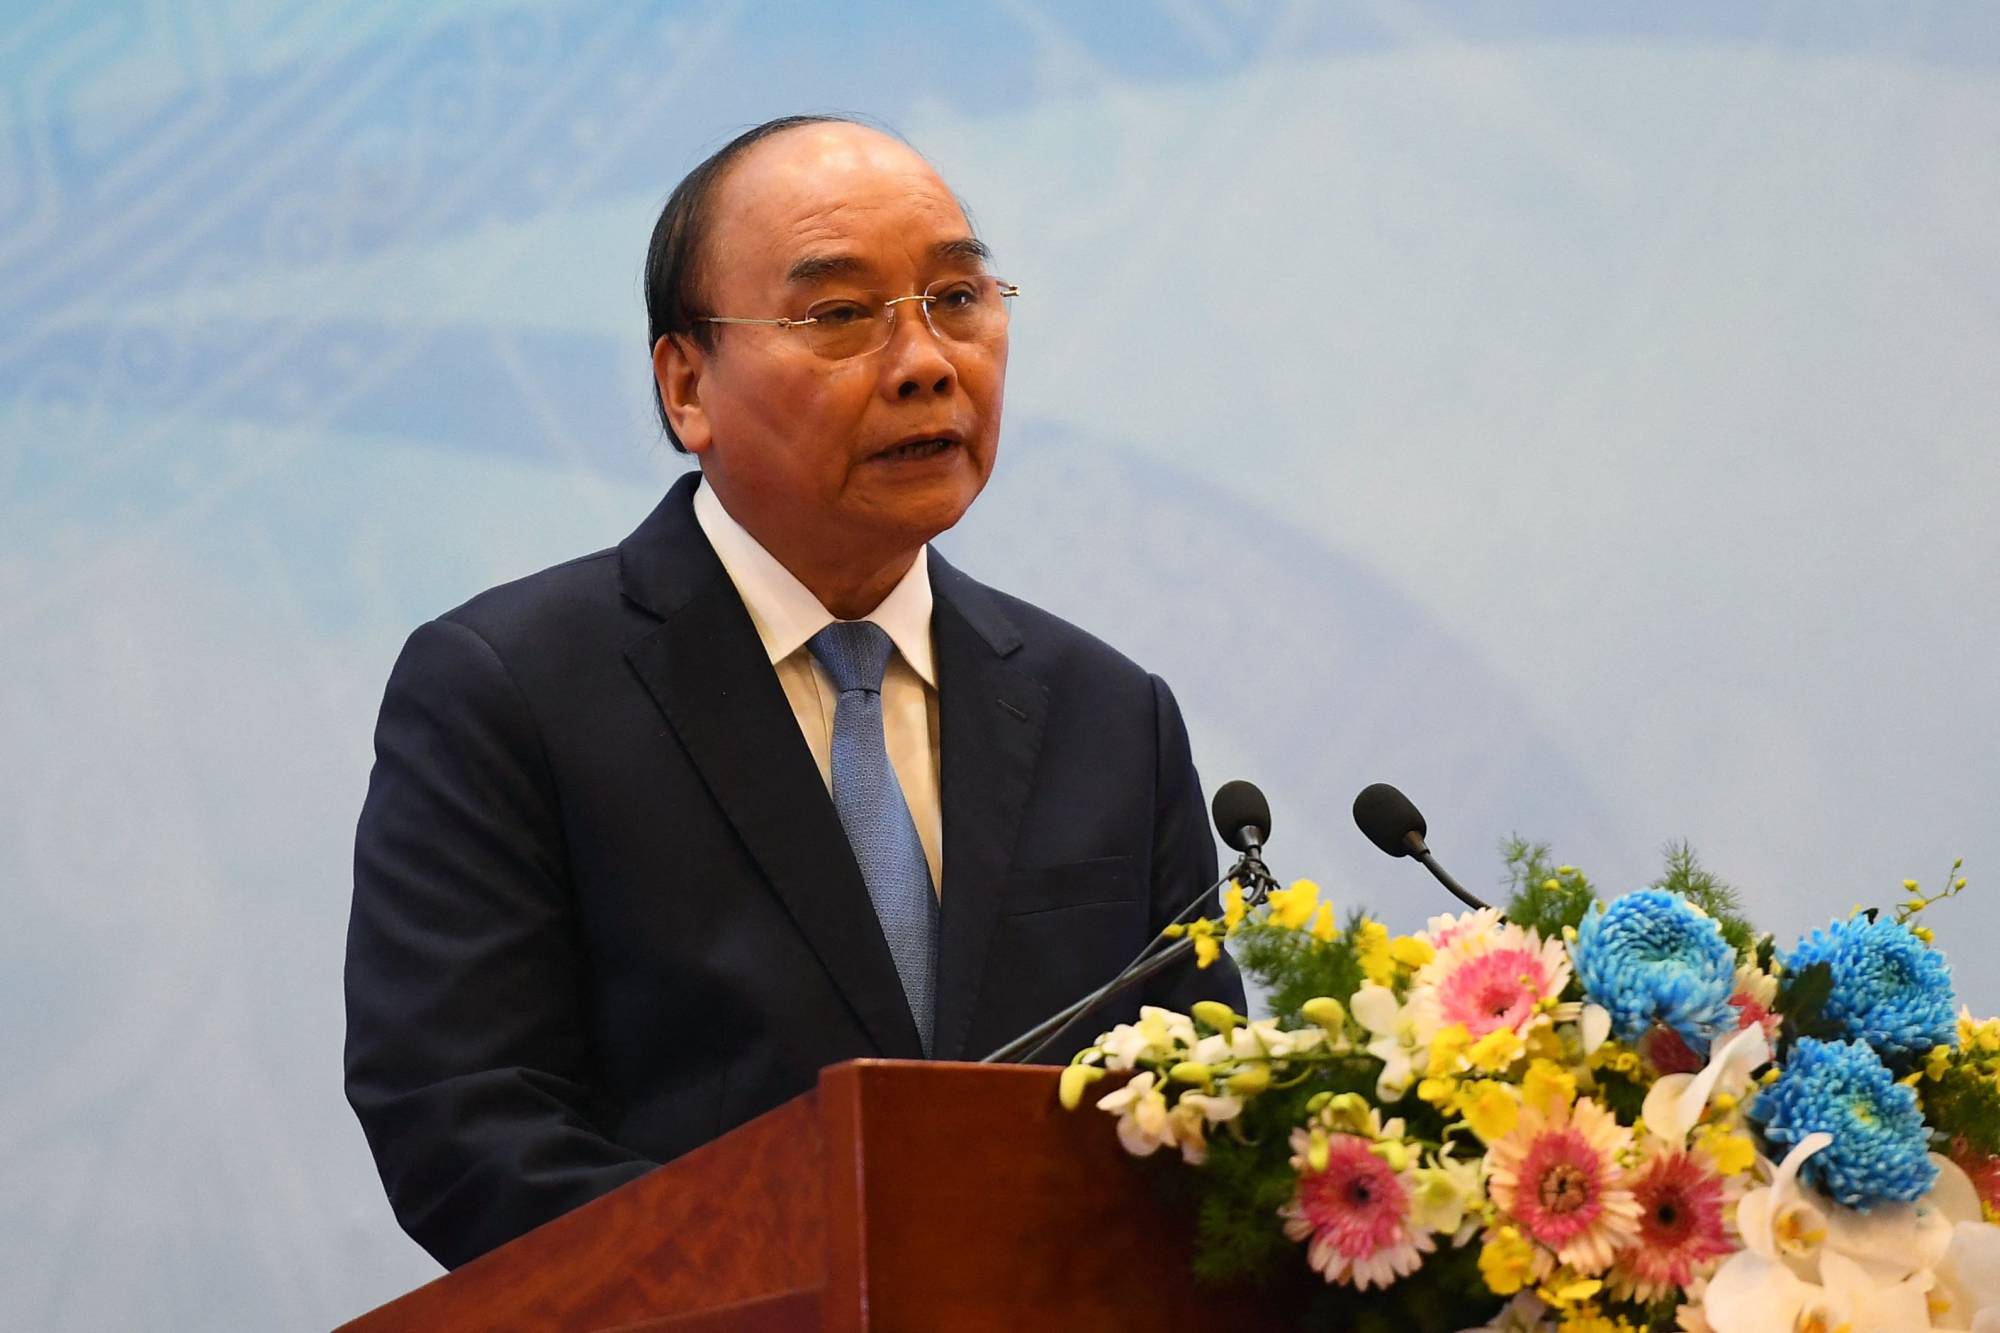 Vietnam's President Nguyen Xuan Phuc speaks at a ceremony commemorating the 45th anniversary of Vietnam's accession to the United Nations in Hanoi's international convention center on Oct. 21. | AFP-JIJI